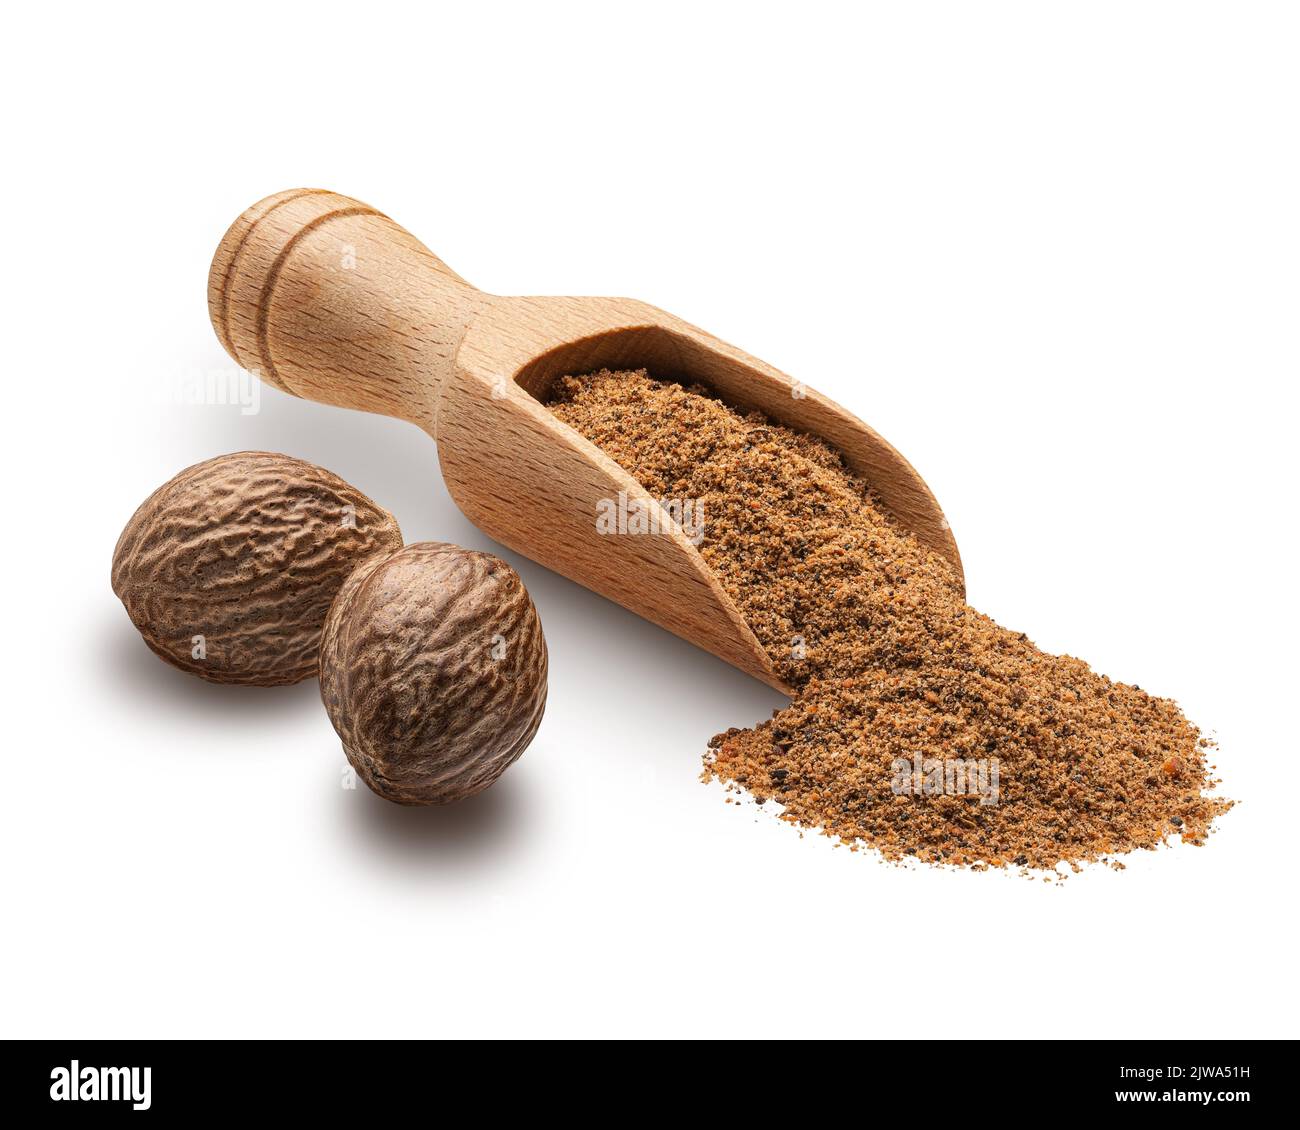 Nutmeg powder in a wooden scoop isolated on white Stock Photo